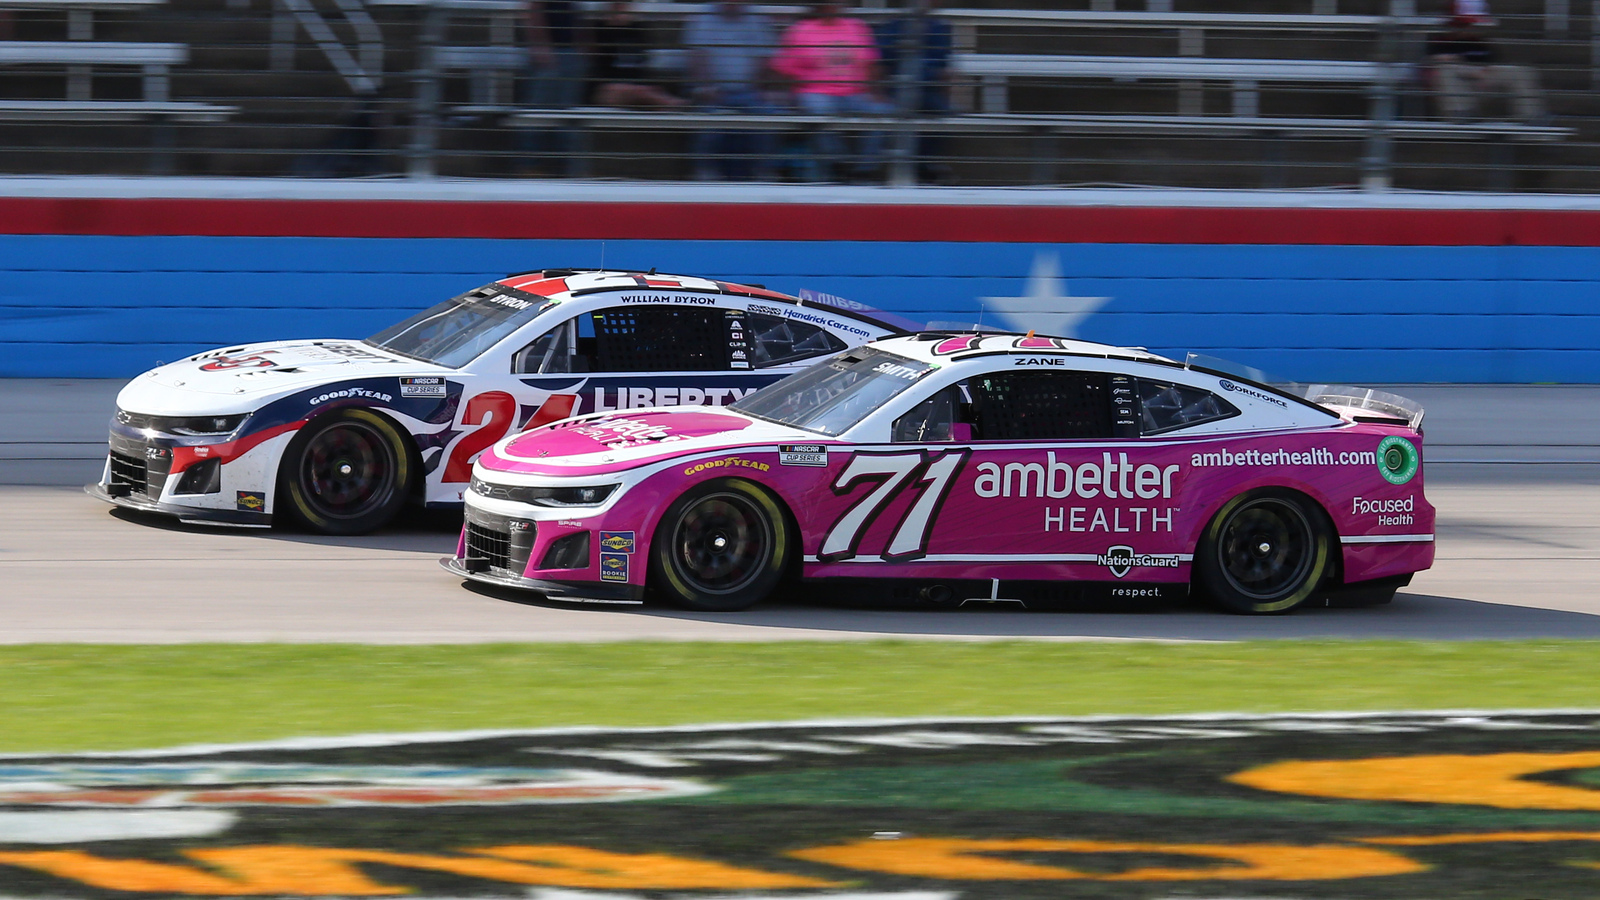 Watch: William Byron wrecks Ross Chastain on double overtime at Texas and helps Chase Elliott to win the race under caution